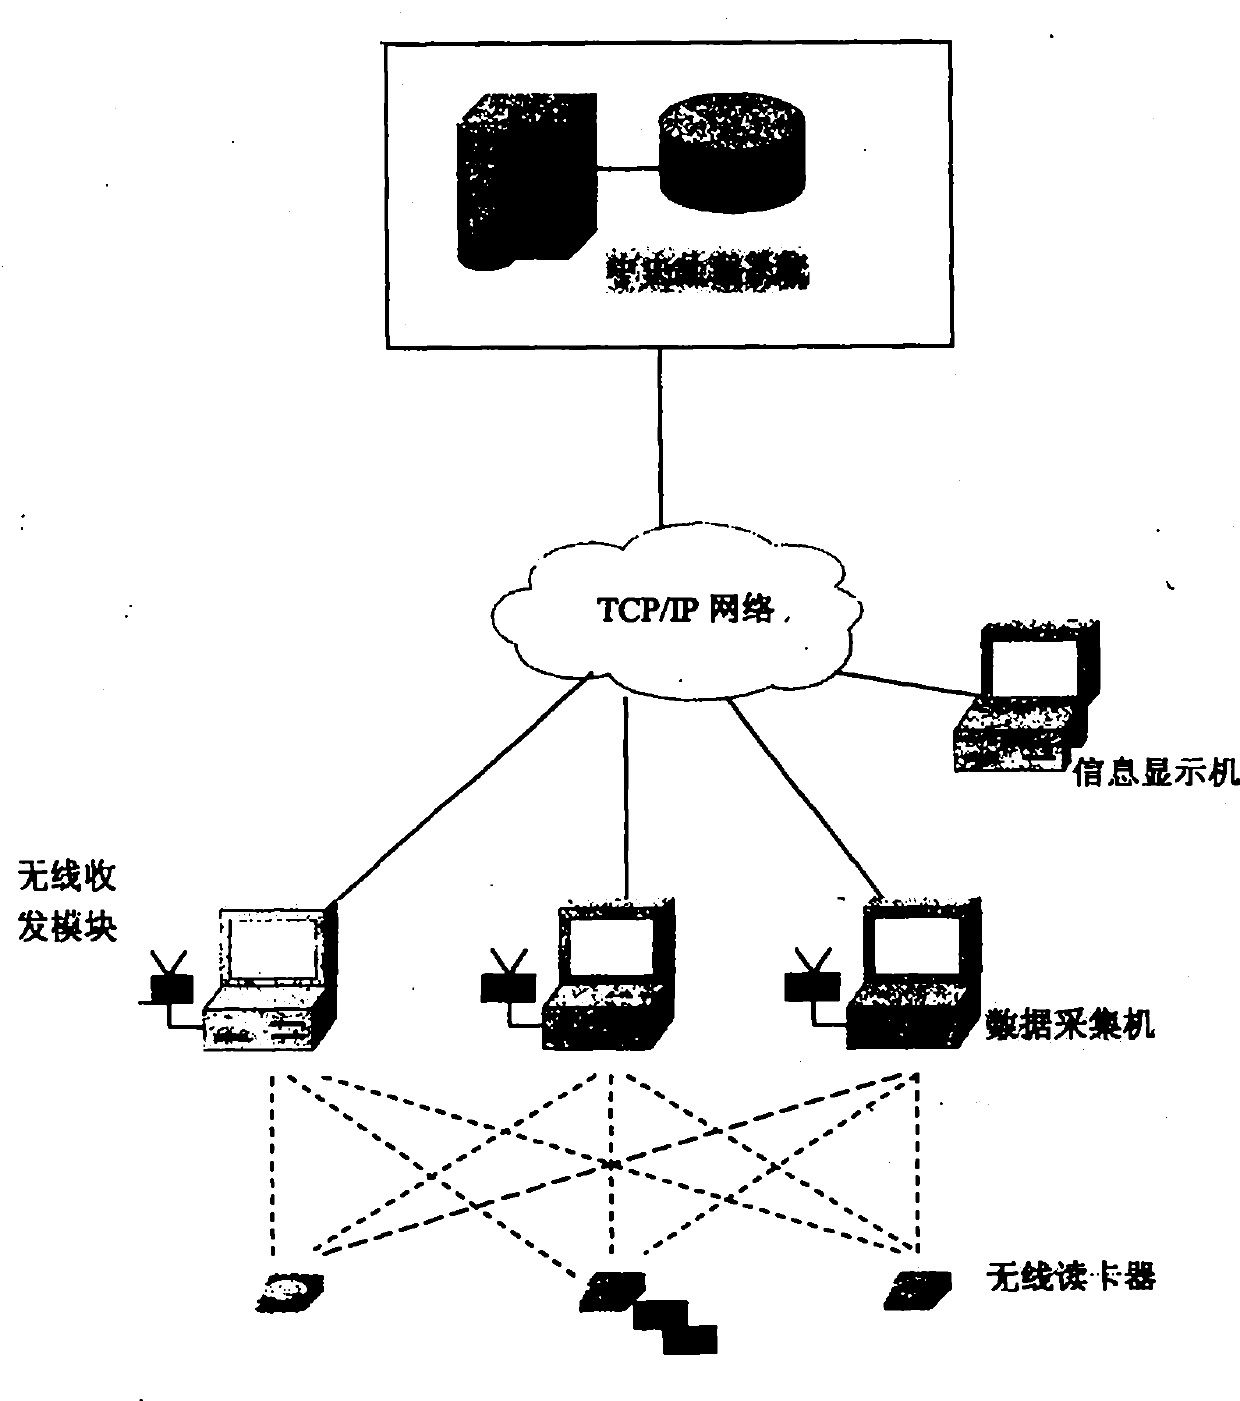 Industrial control system and management method for wireless structure